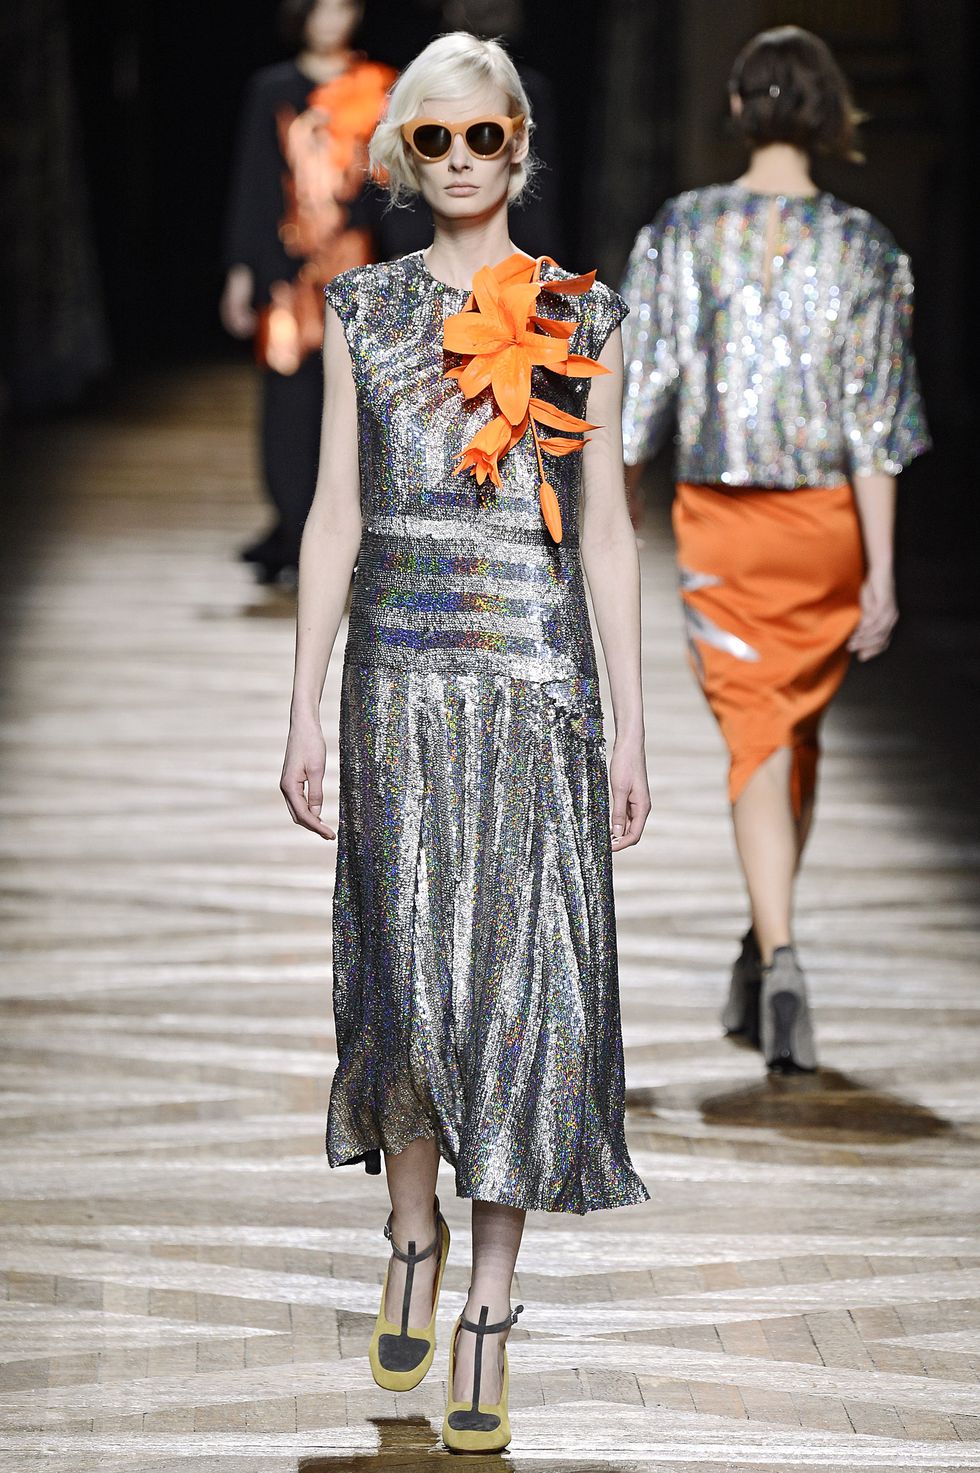 paris, france february 26 a model walks the runway at the dries van noten autumn winter 2014 fashion show during paris fashion week on february 26, 2014 in paris, france photo by catwalkinggetty images